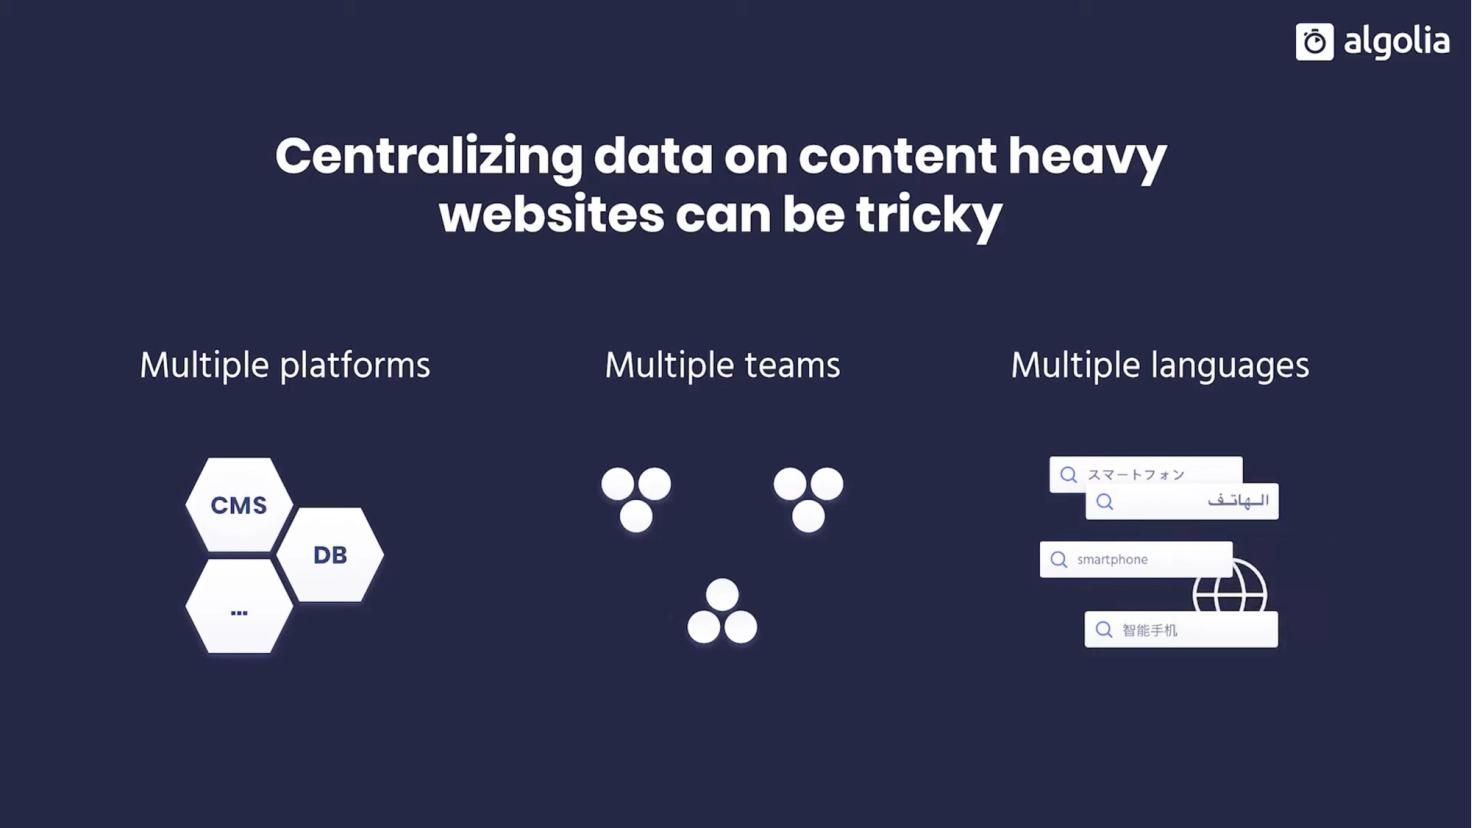 Centralizing data on content heavy websites can be tricky because of multiple platforms, multiple teams, and multiple languages.